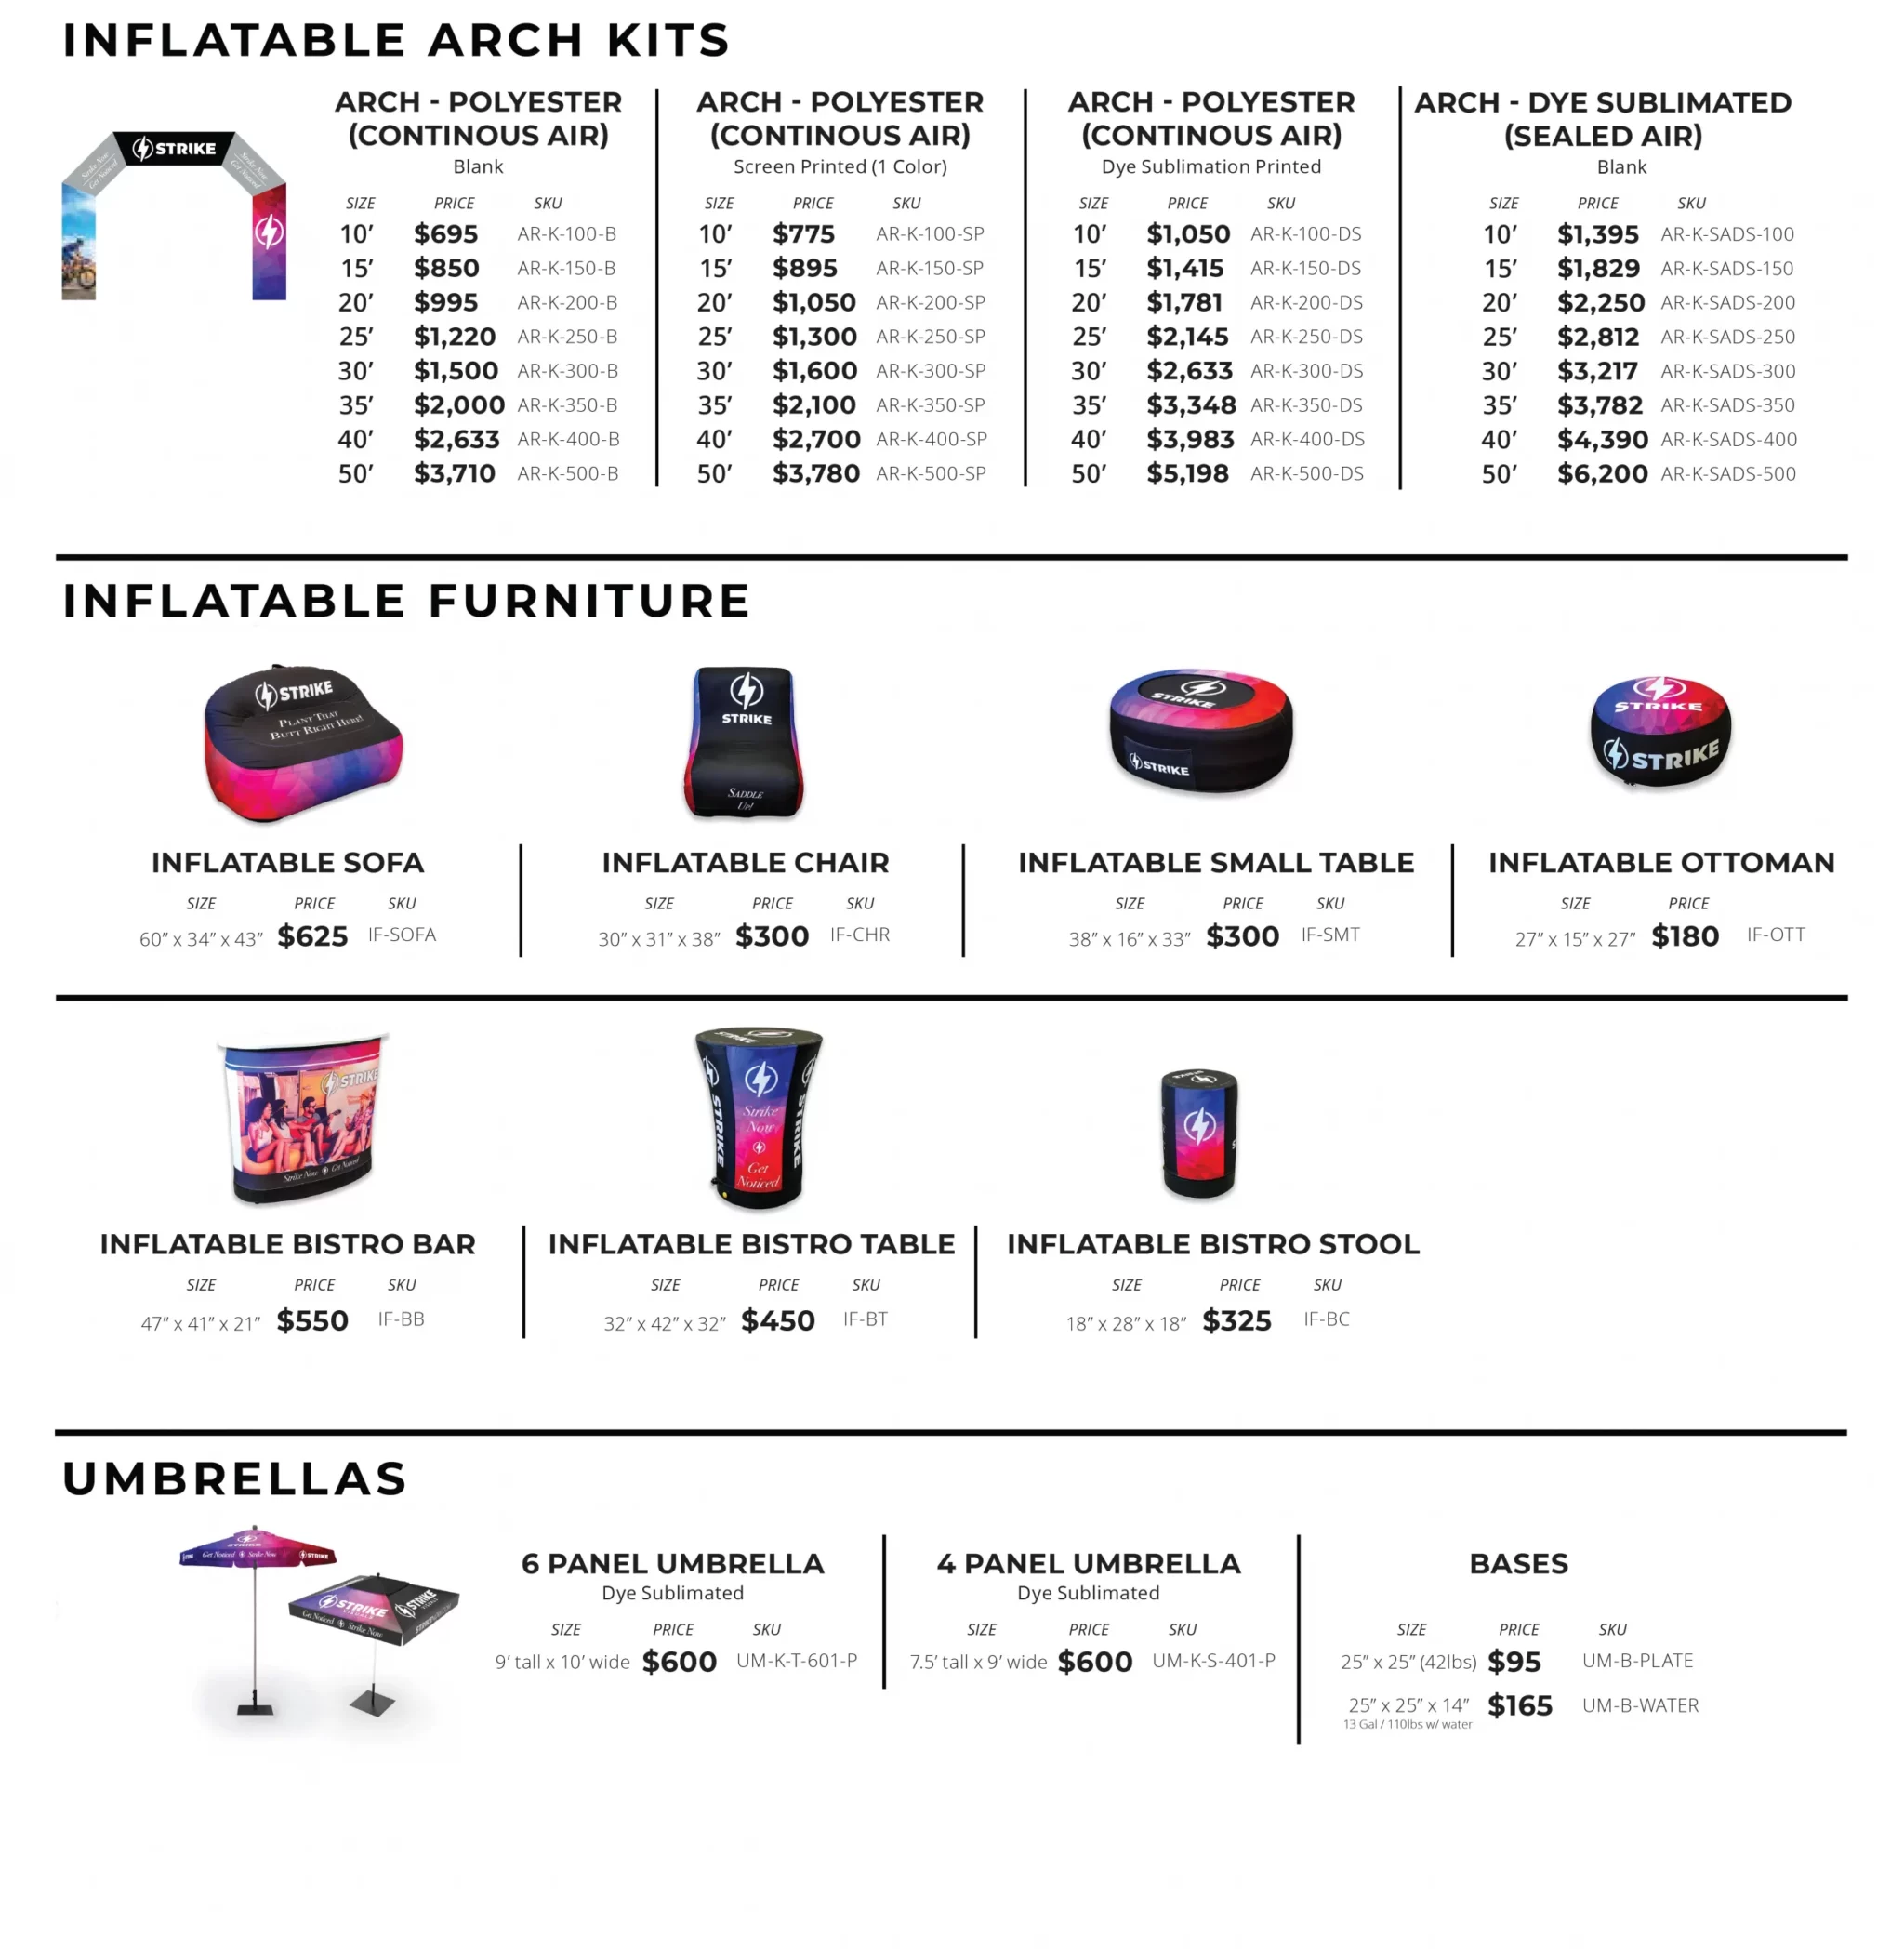 resellers pricing guide for inflatable arch kits, inflatable furniture, umbrellas